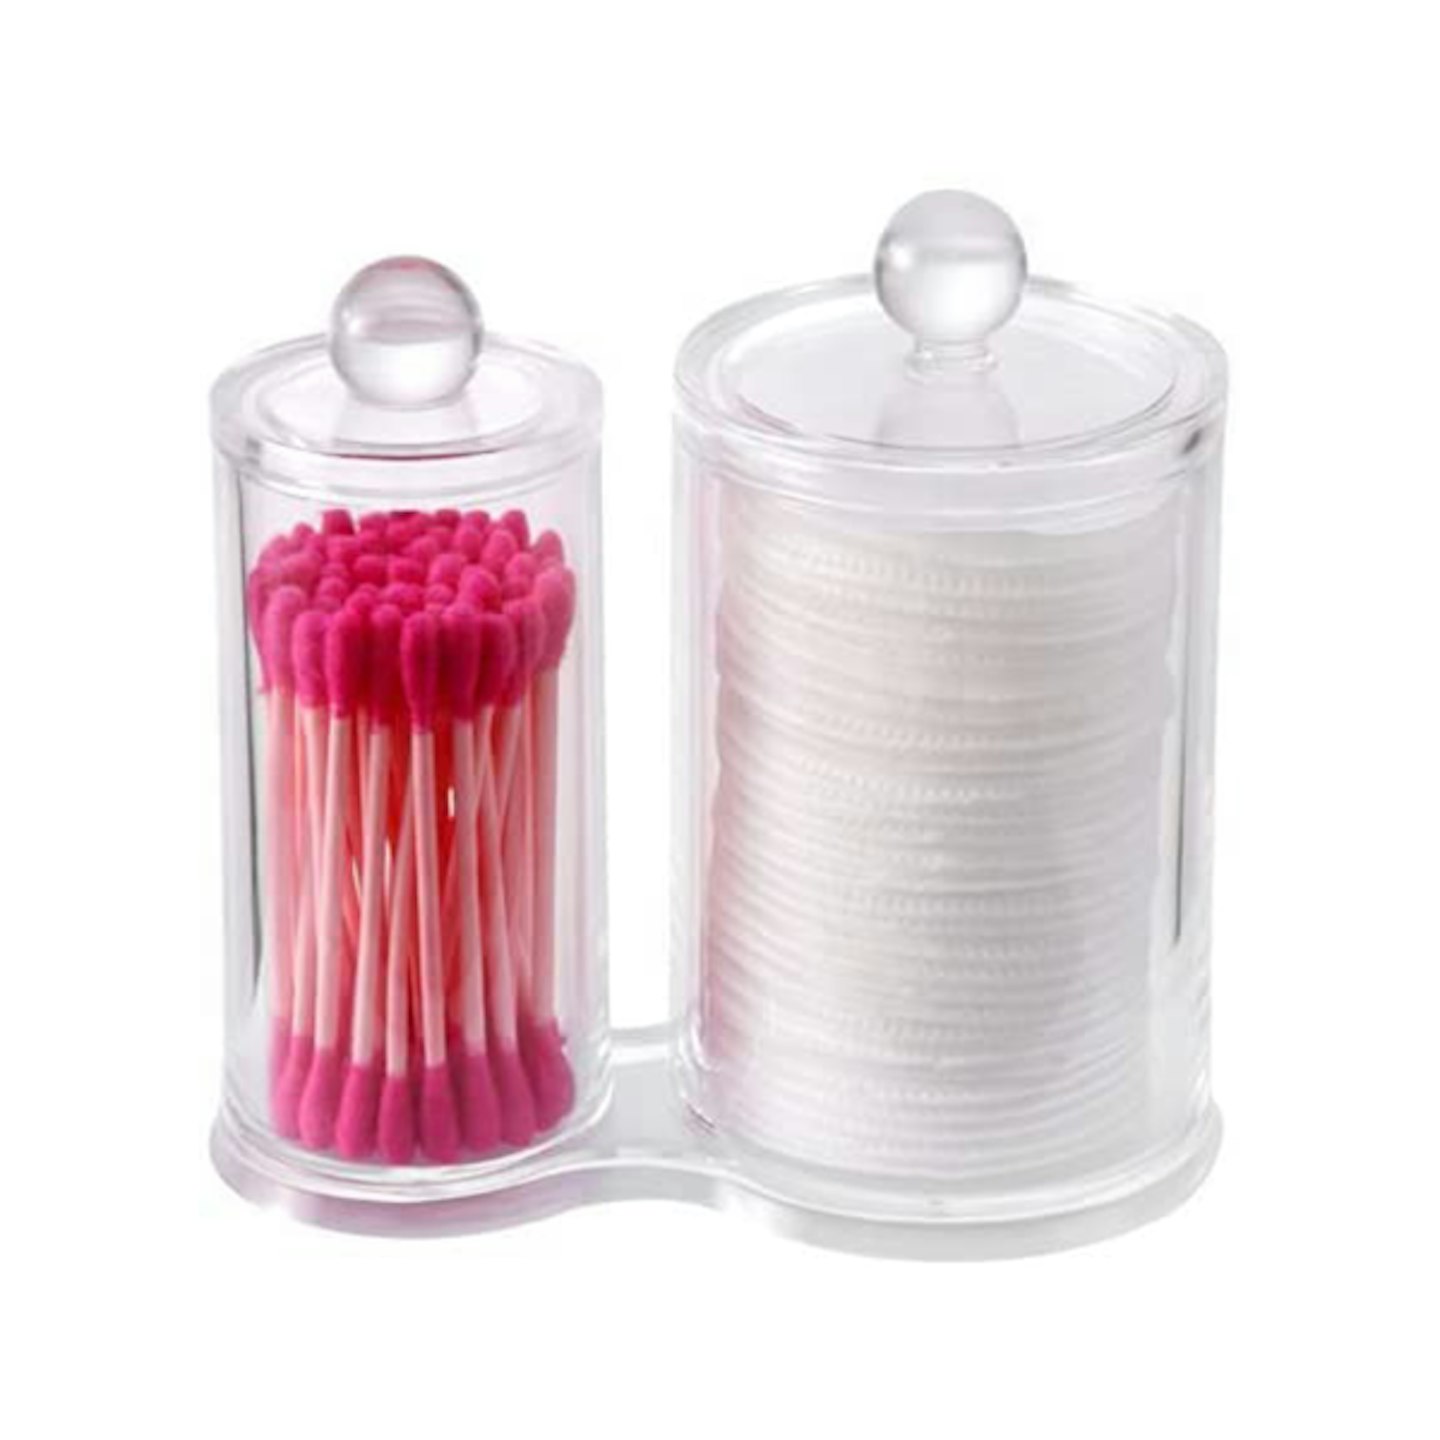 PuTwo Makeup Organizer Cotton Pads Holder Swab Jar Divider with 2 Sections